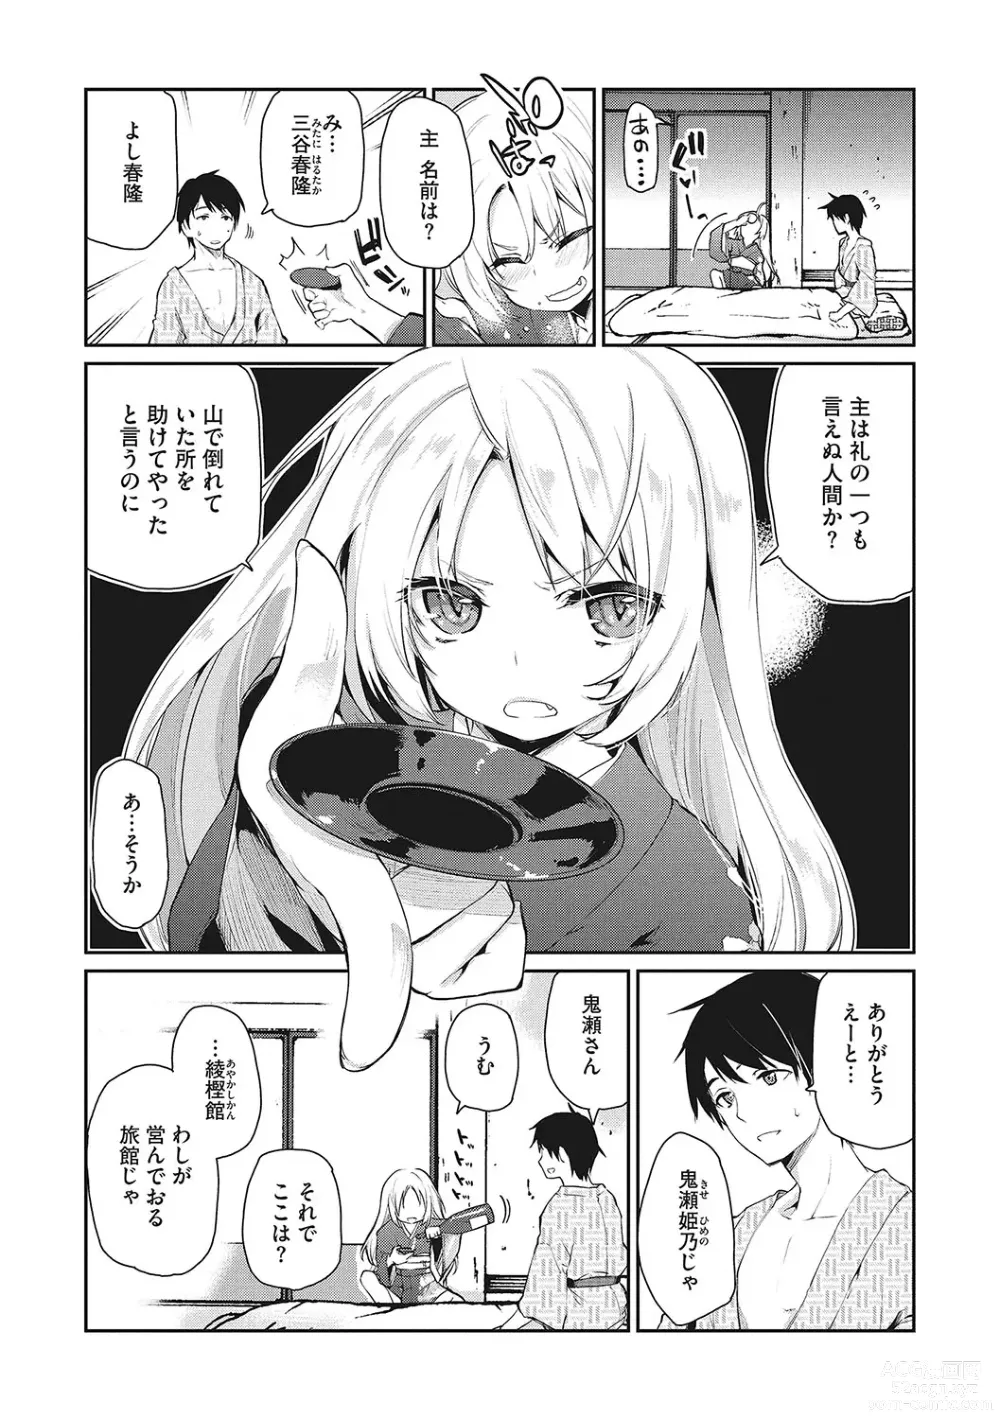 Page 12 of manga LQ -Little Queen- Vol. 54